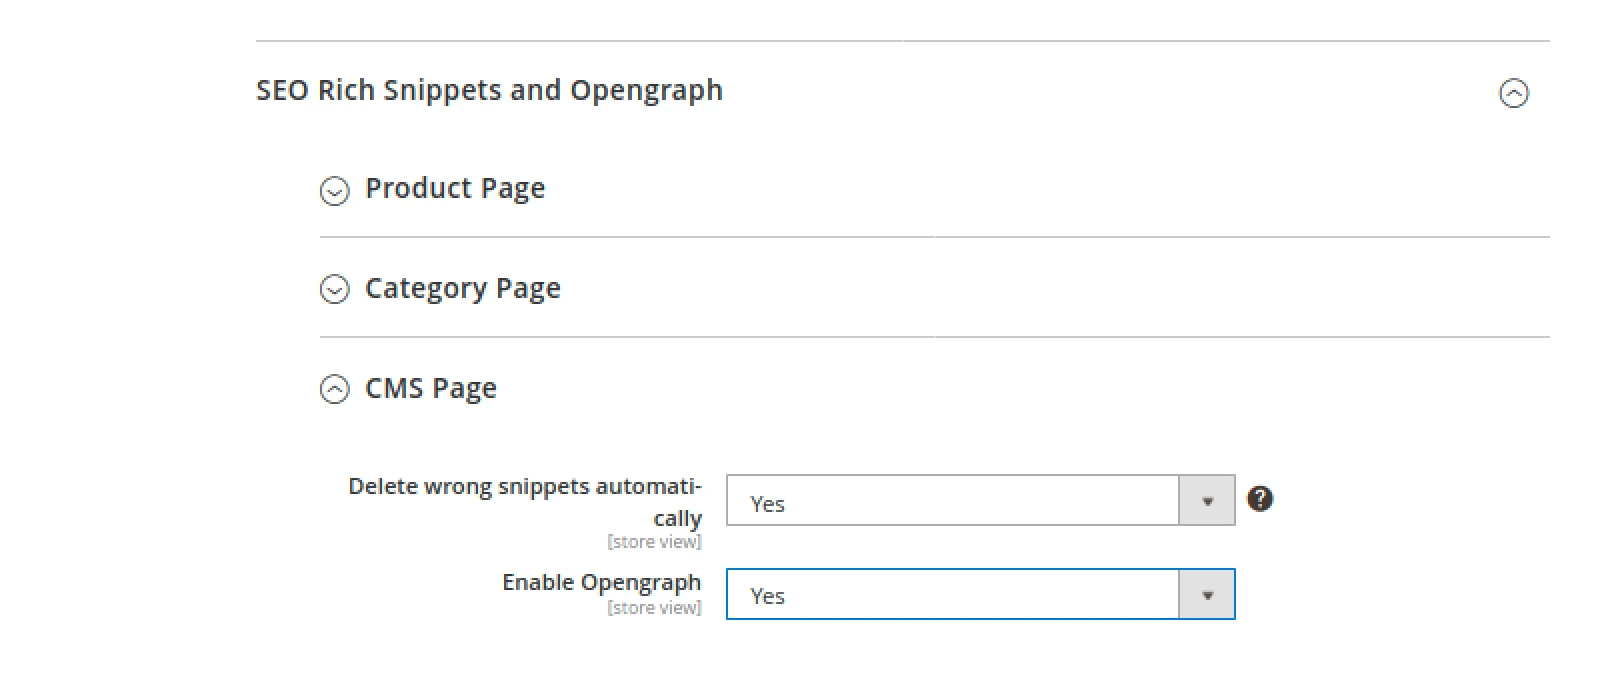 Opengraph toggle for CMS page in Mirasvit Advanced SEO Suite